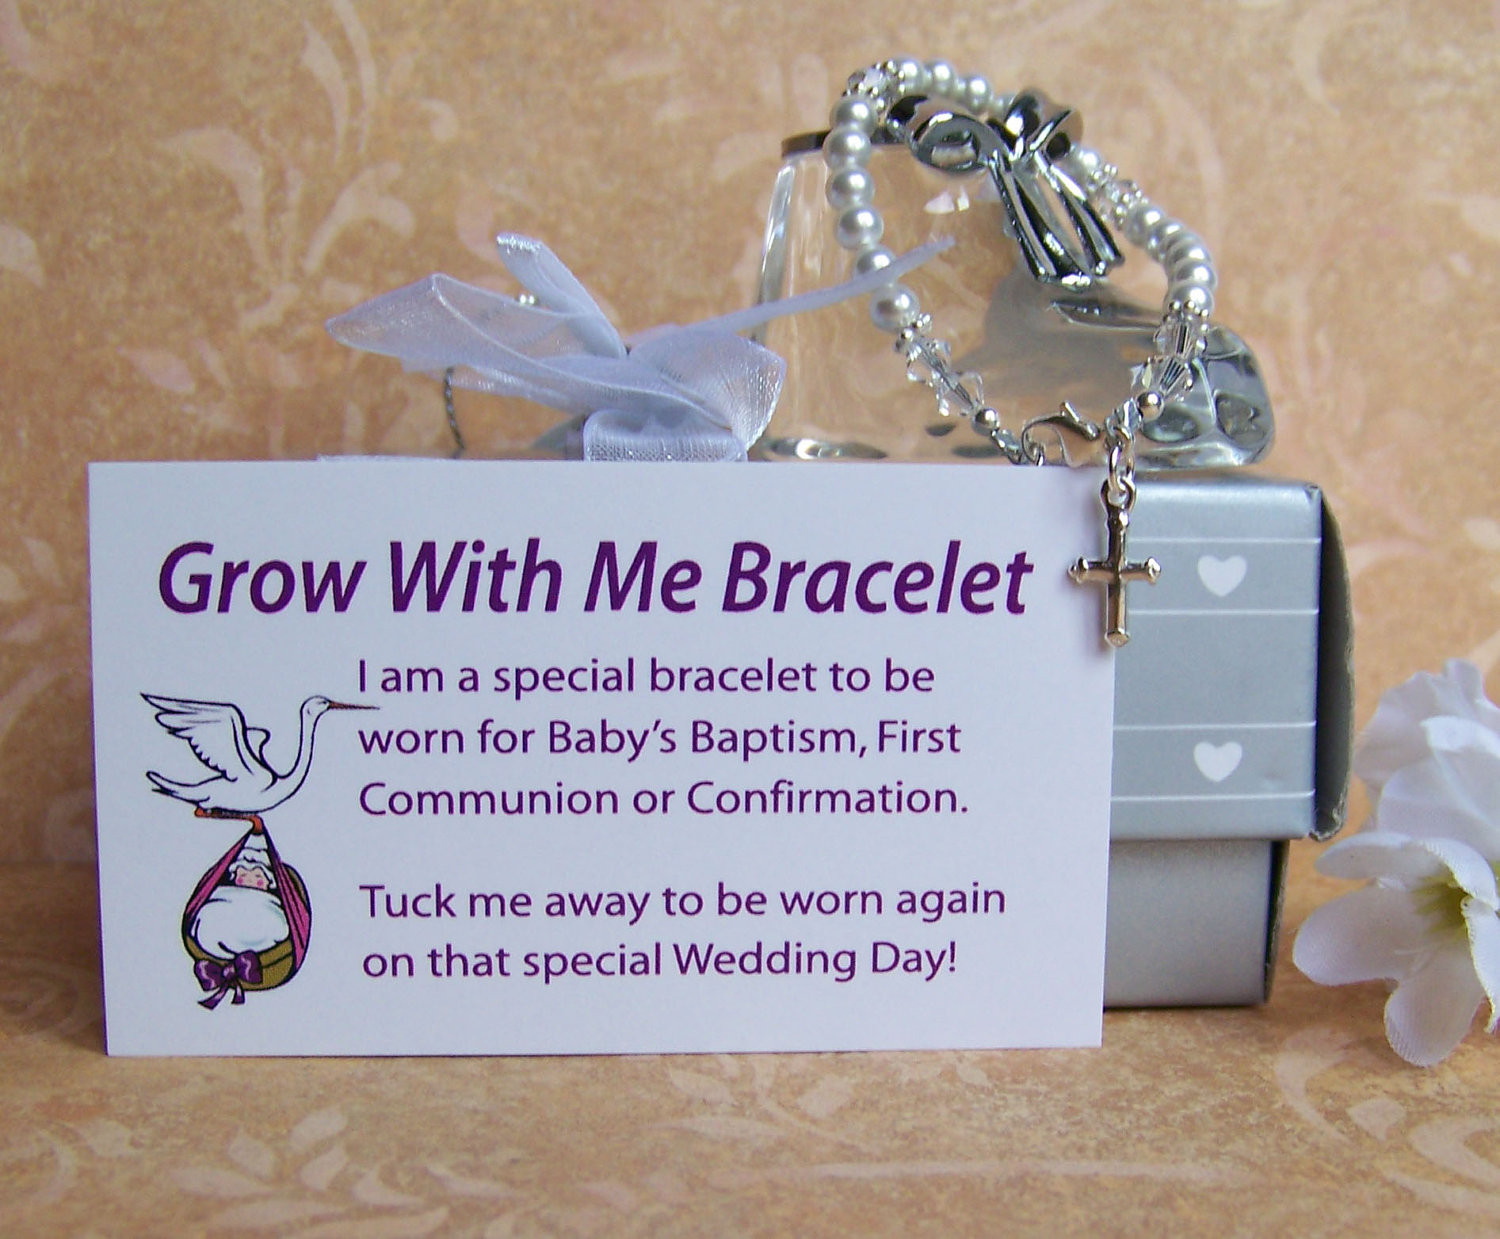 Gift Ideas For A Baby'S Baptism
 Baby Girl Baptism Bracelet Grow With Me by luckycharm5286